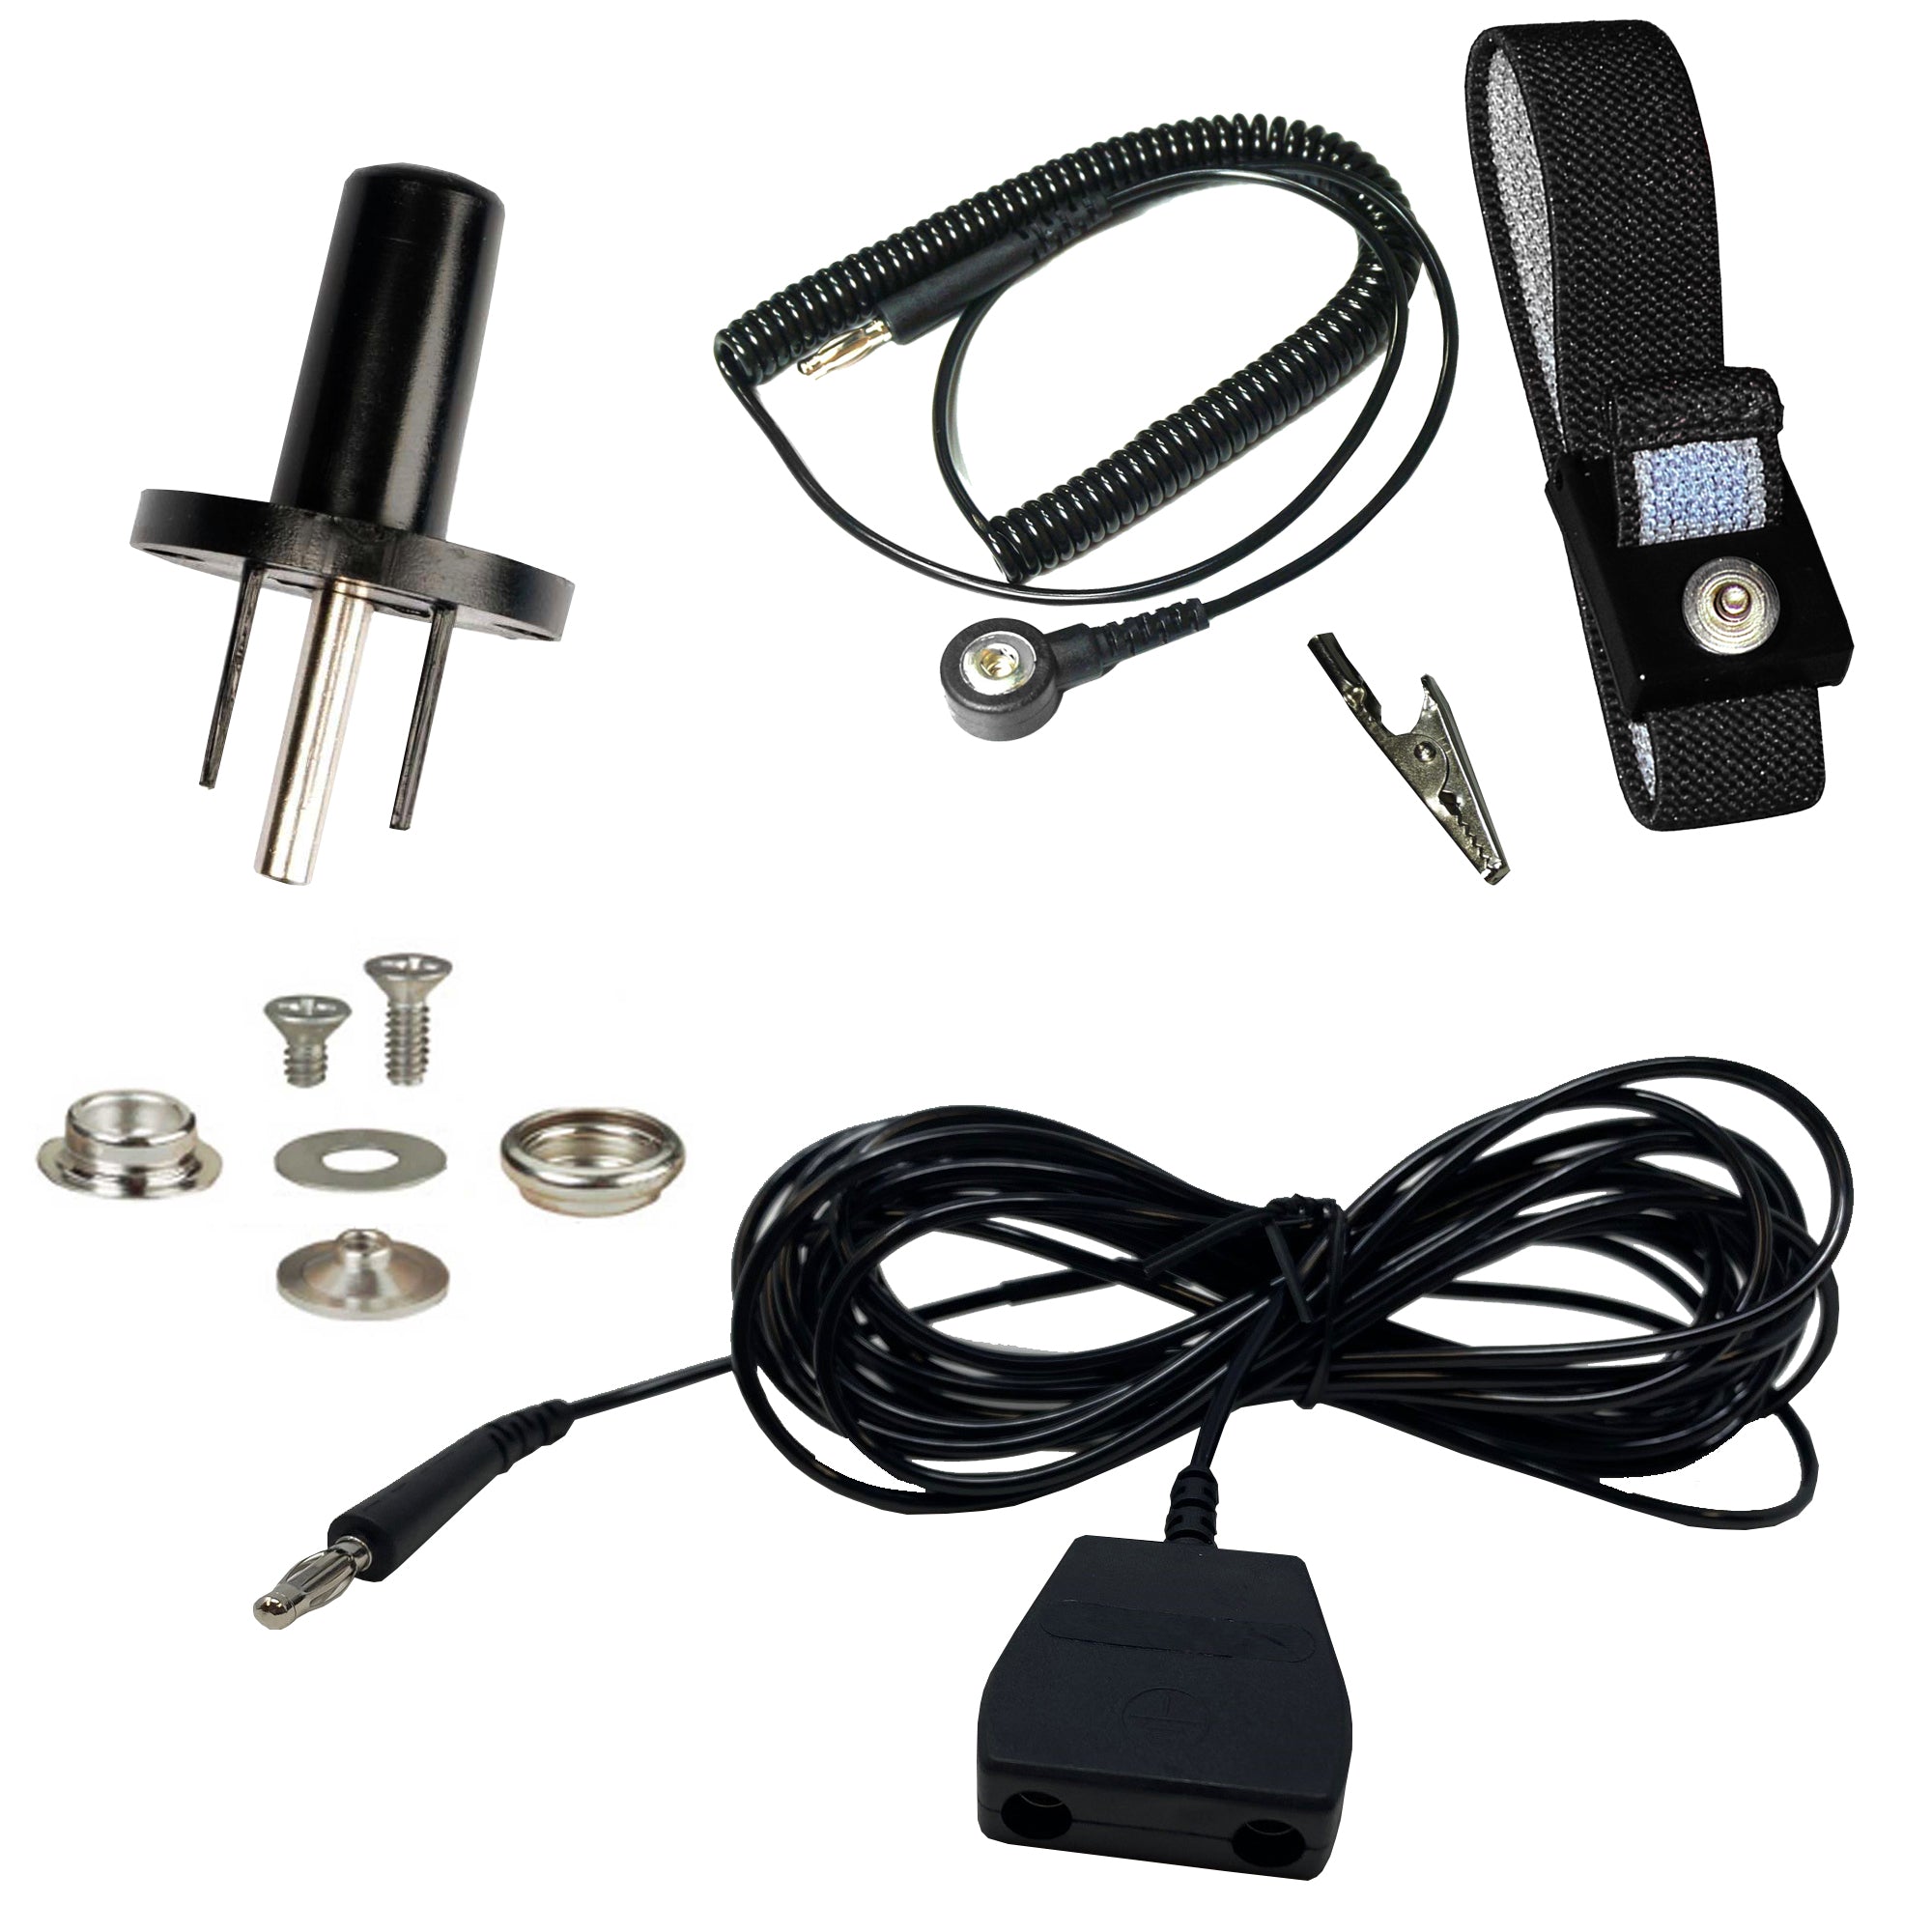 Grounding Snap with ESD Grounding Plug for Universal Grounding Table Mat,  Universal Snap Kit and 16ft Grounding Cord Makes Perfect Grounding Wire Kit  in ESD Supplies, ESD Grounding Kit & Ground Cord 